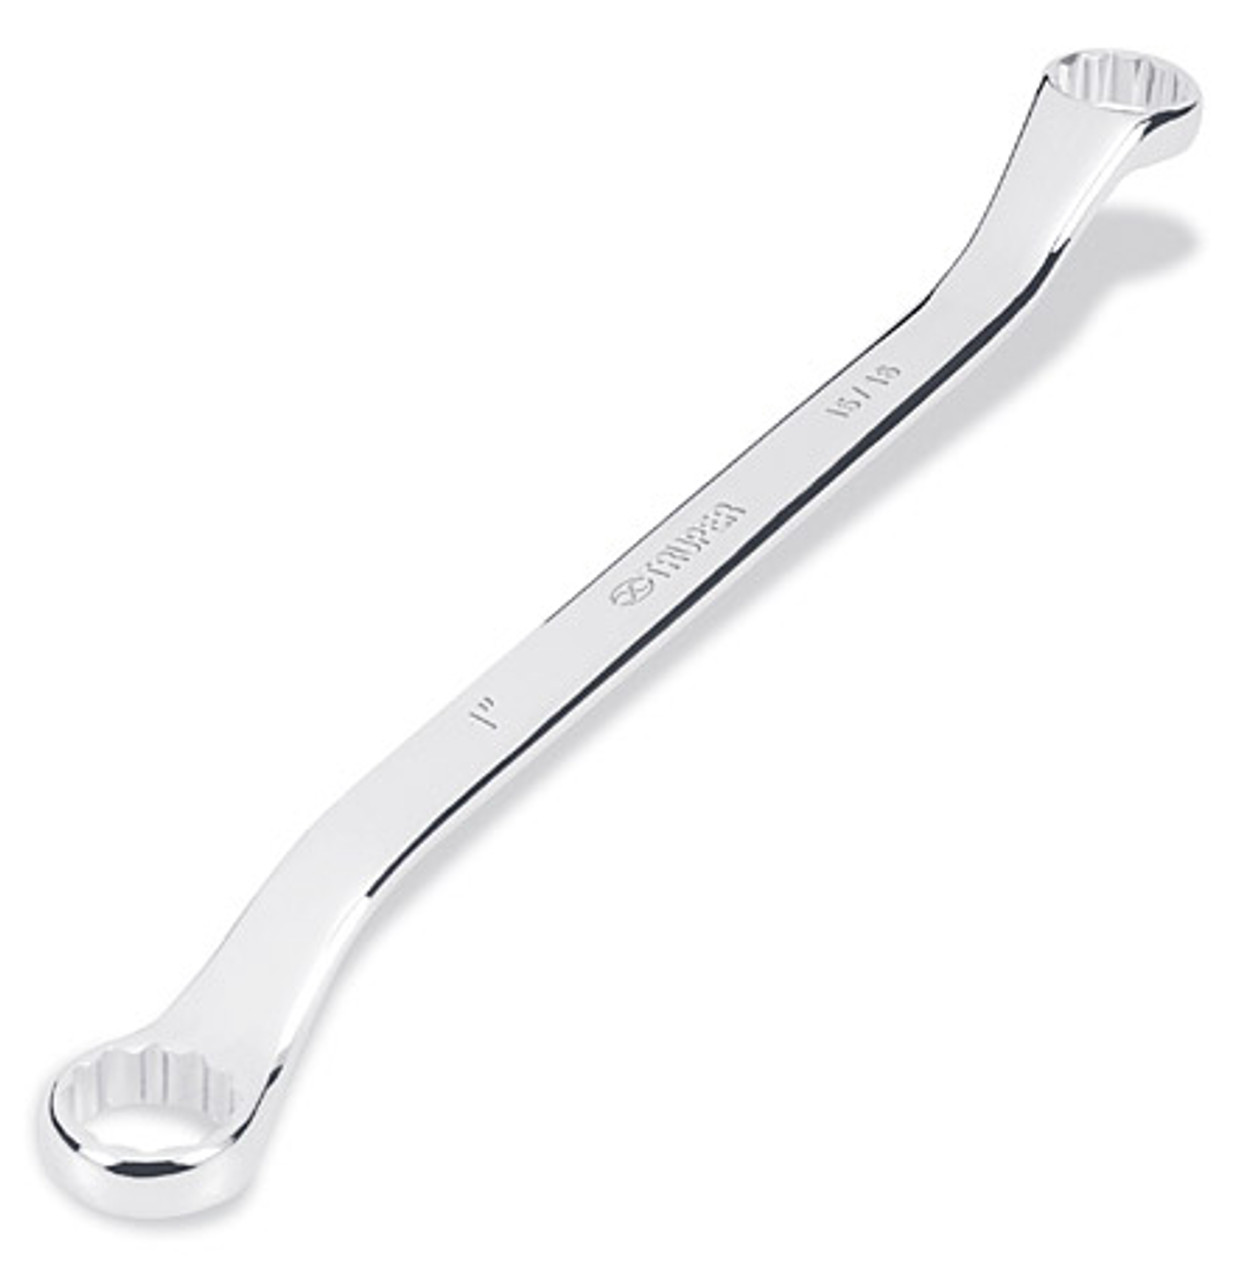 Truper 40ø Offset Box Wrenches SAE, 1-1/16x1-1/8x15.9" Offset Box Wrench #15756